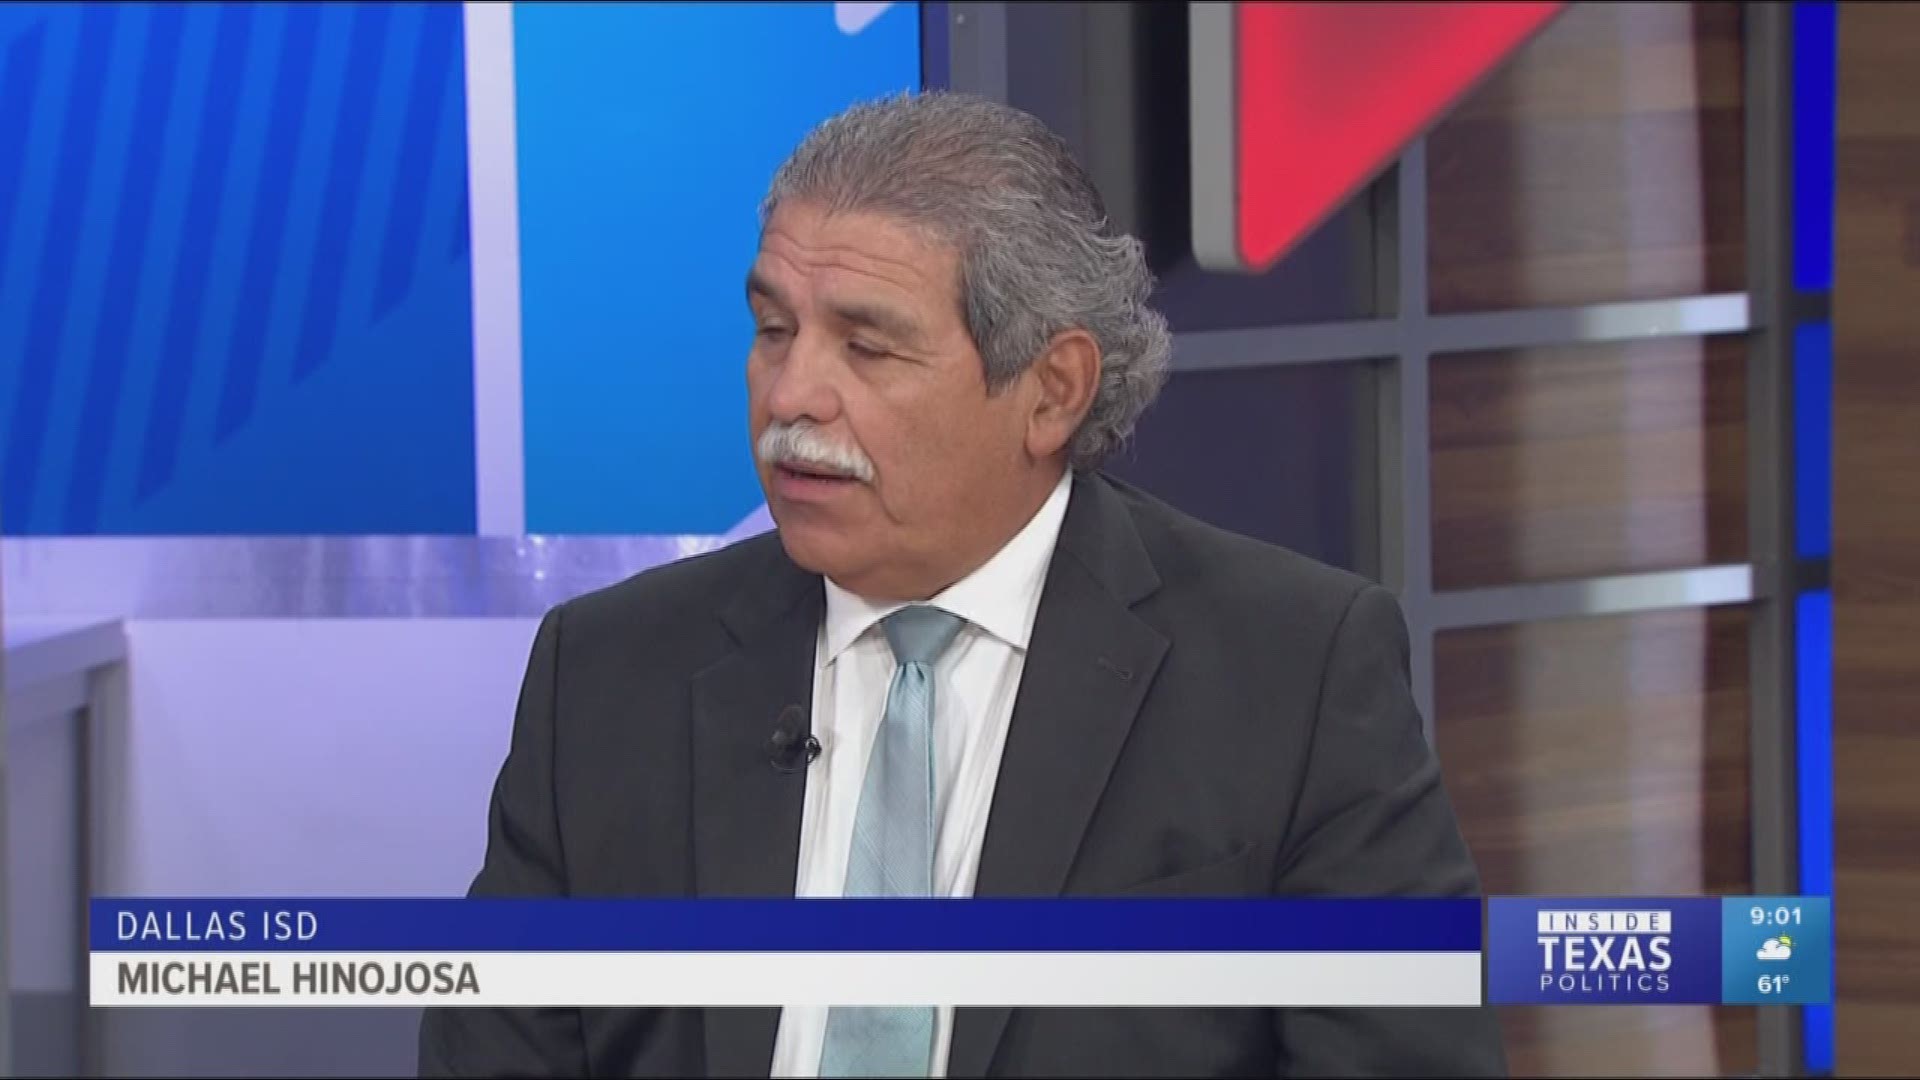 Inside Texas Politics began with Dallas ISD Superintendent Michael Hinojosa. He discussed the school district's long-range facilities plan.